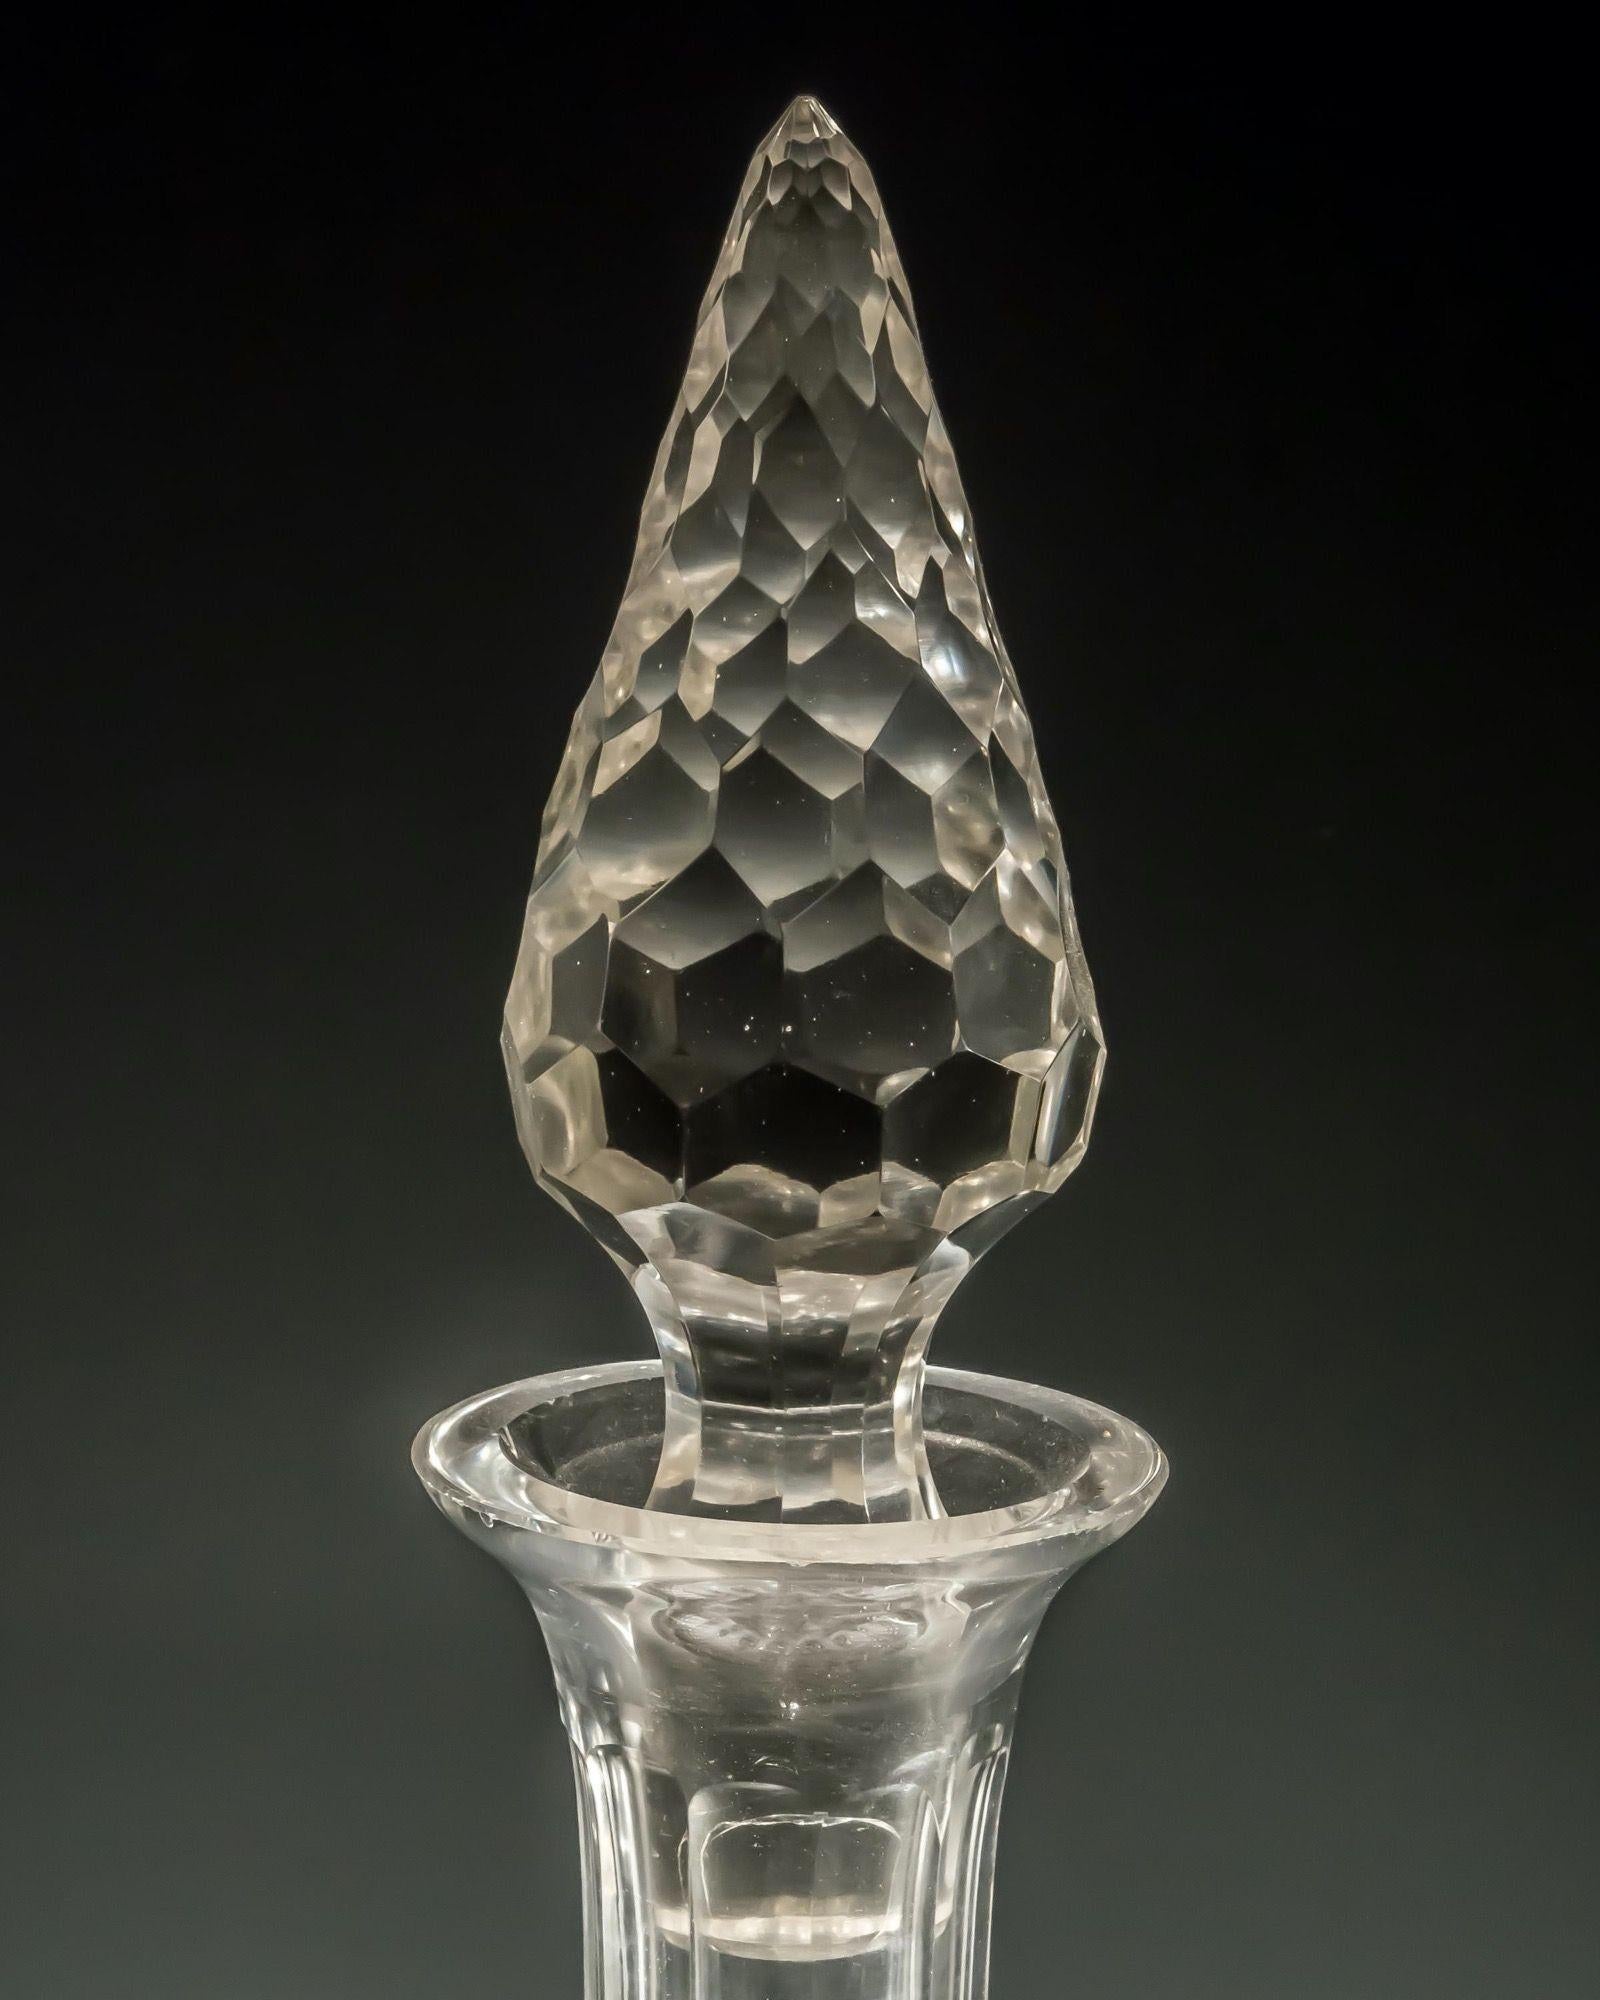 A monumental Victorian hobnail cut rehoboam decanter on a star cut pedestal foot.
Measures: Height 68 cm (26 3/4